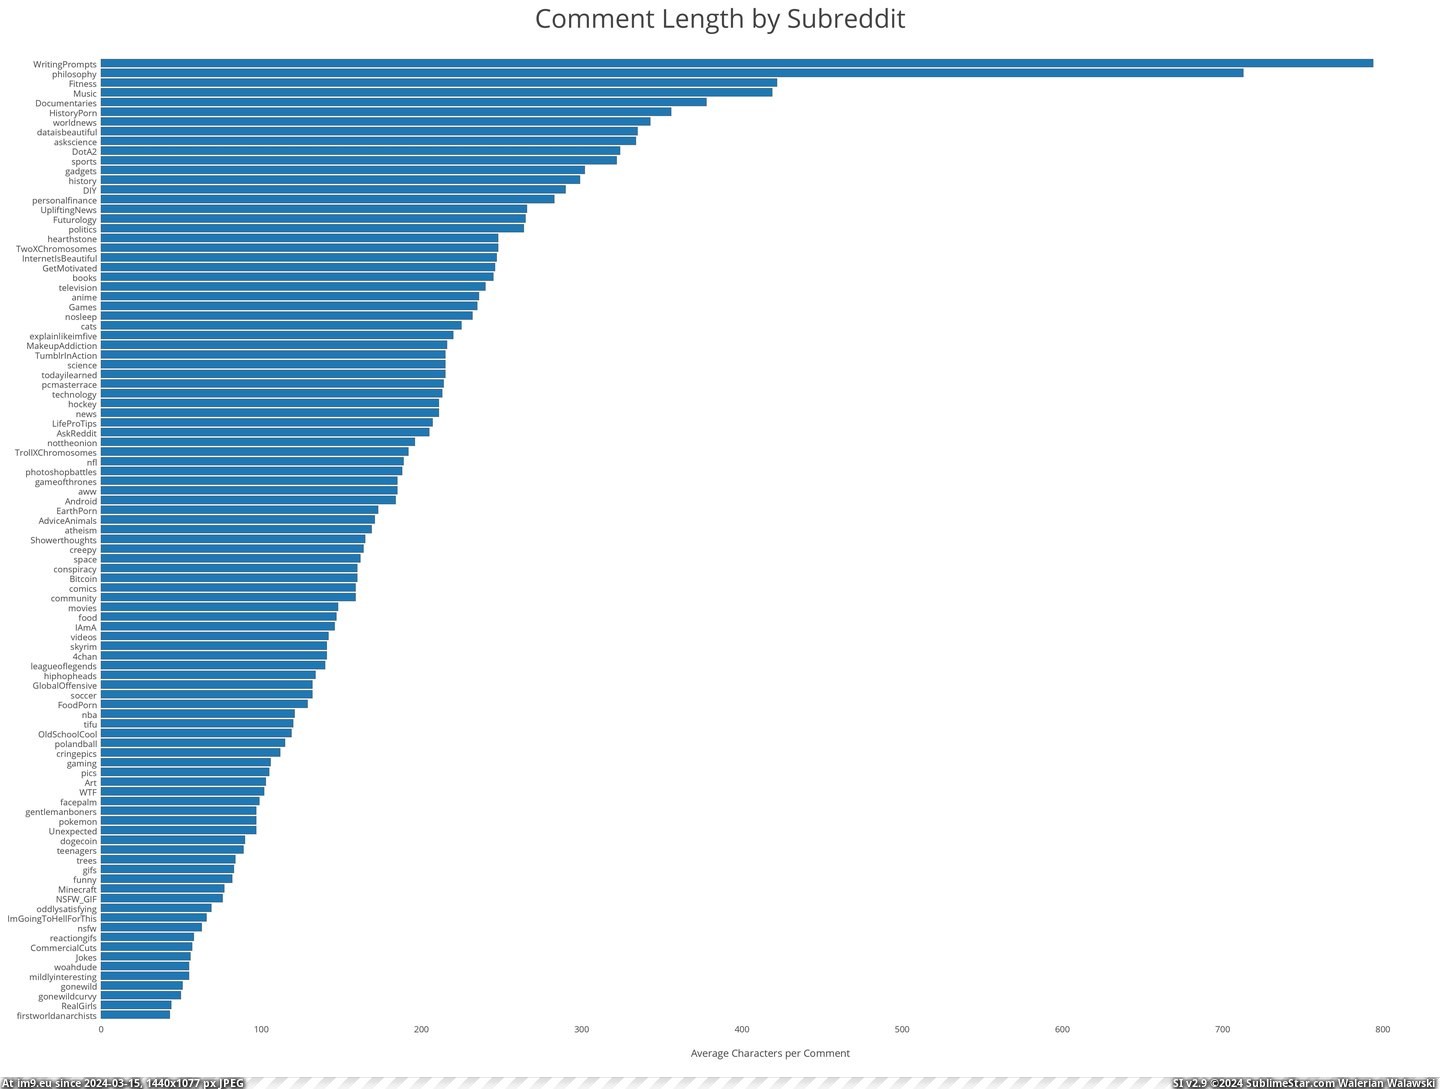 #Length  #Revised [Dataisbeautiful] Comment Length by Subreddit (REVISED) [OC] Pic. (Obraz z album My r/DATAISBEAUTIFUL favs))